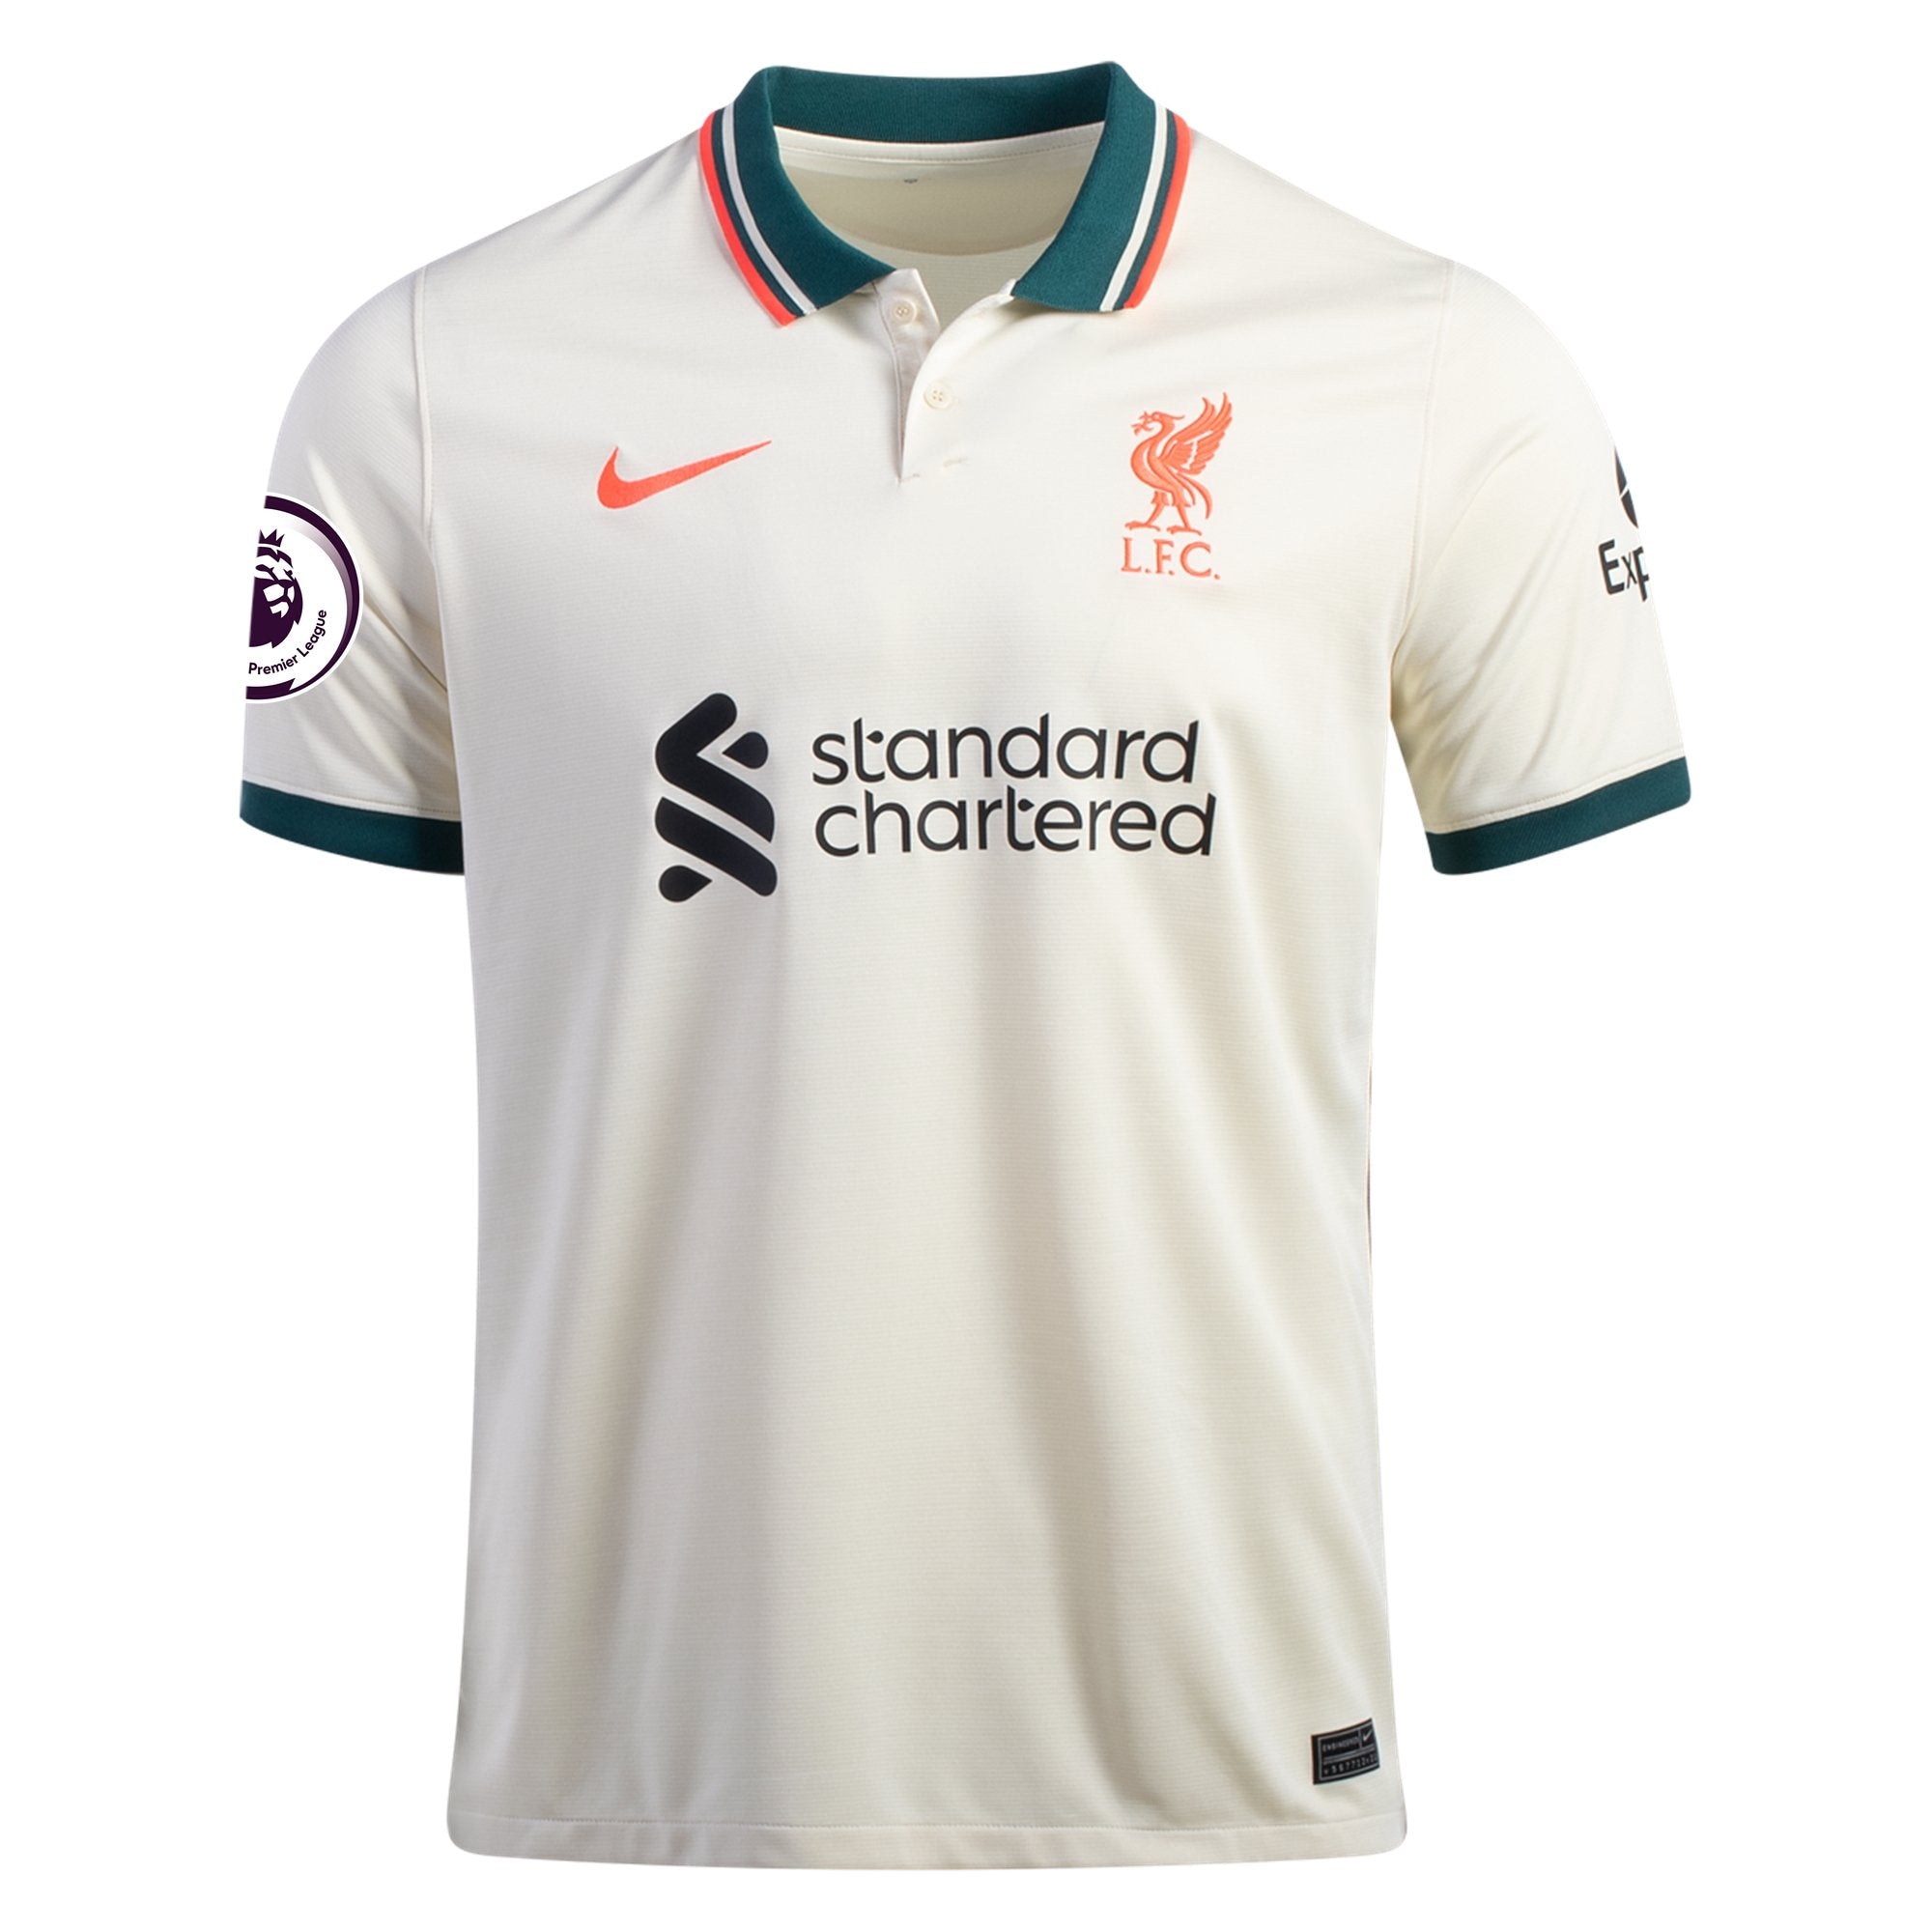 Introducing the NEW 2021/22 Nike Liverpool Home kit 